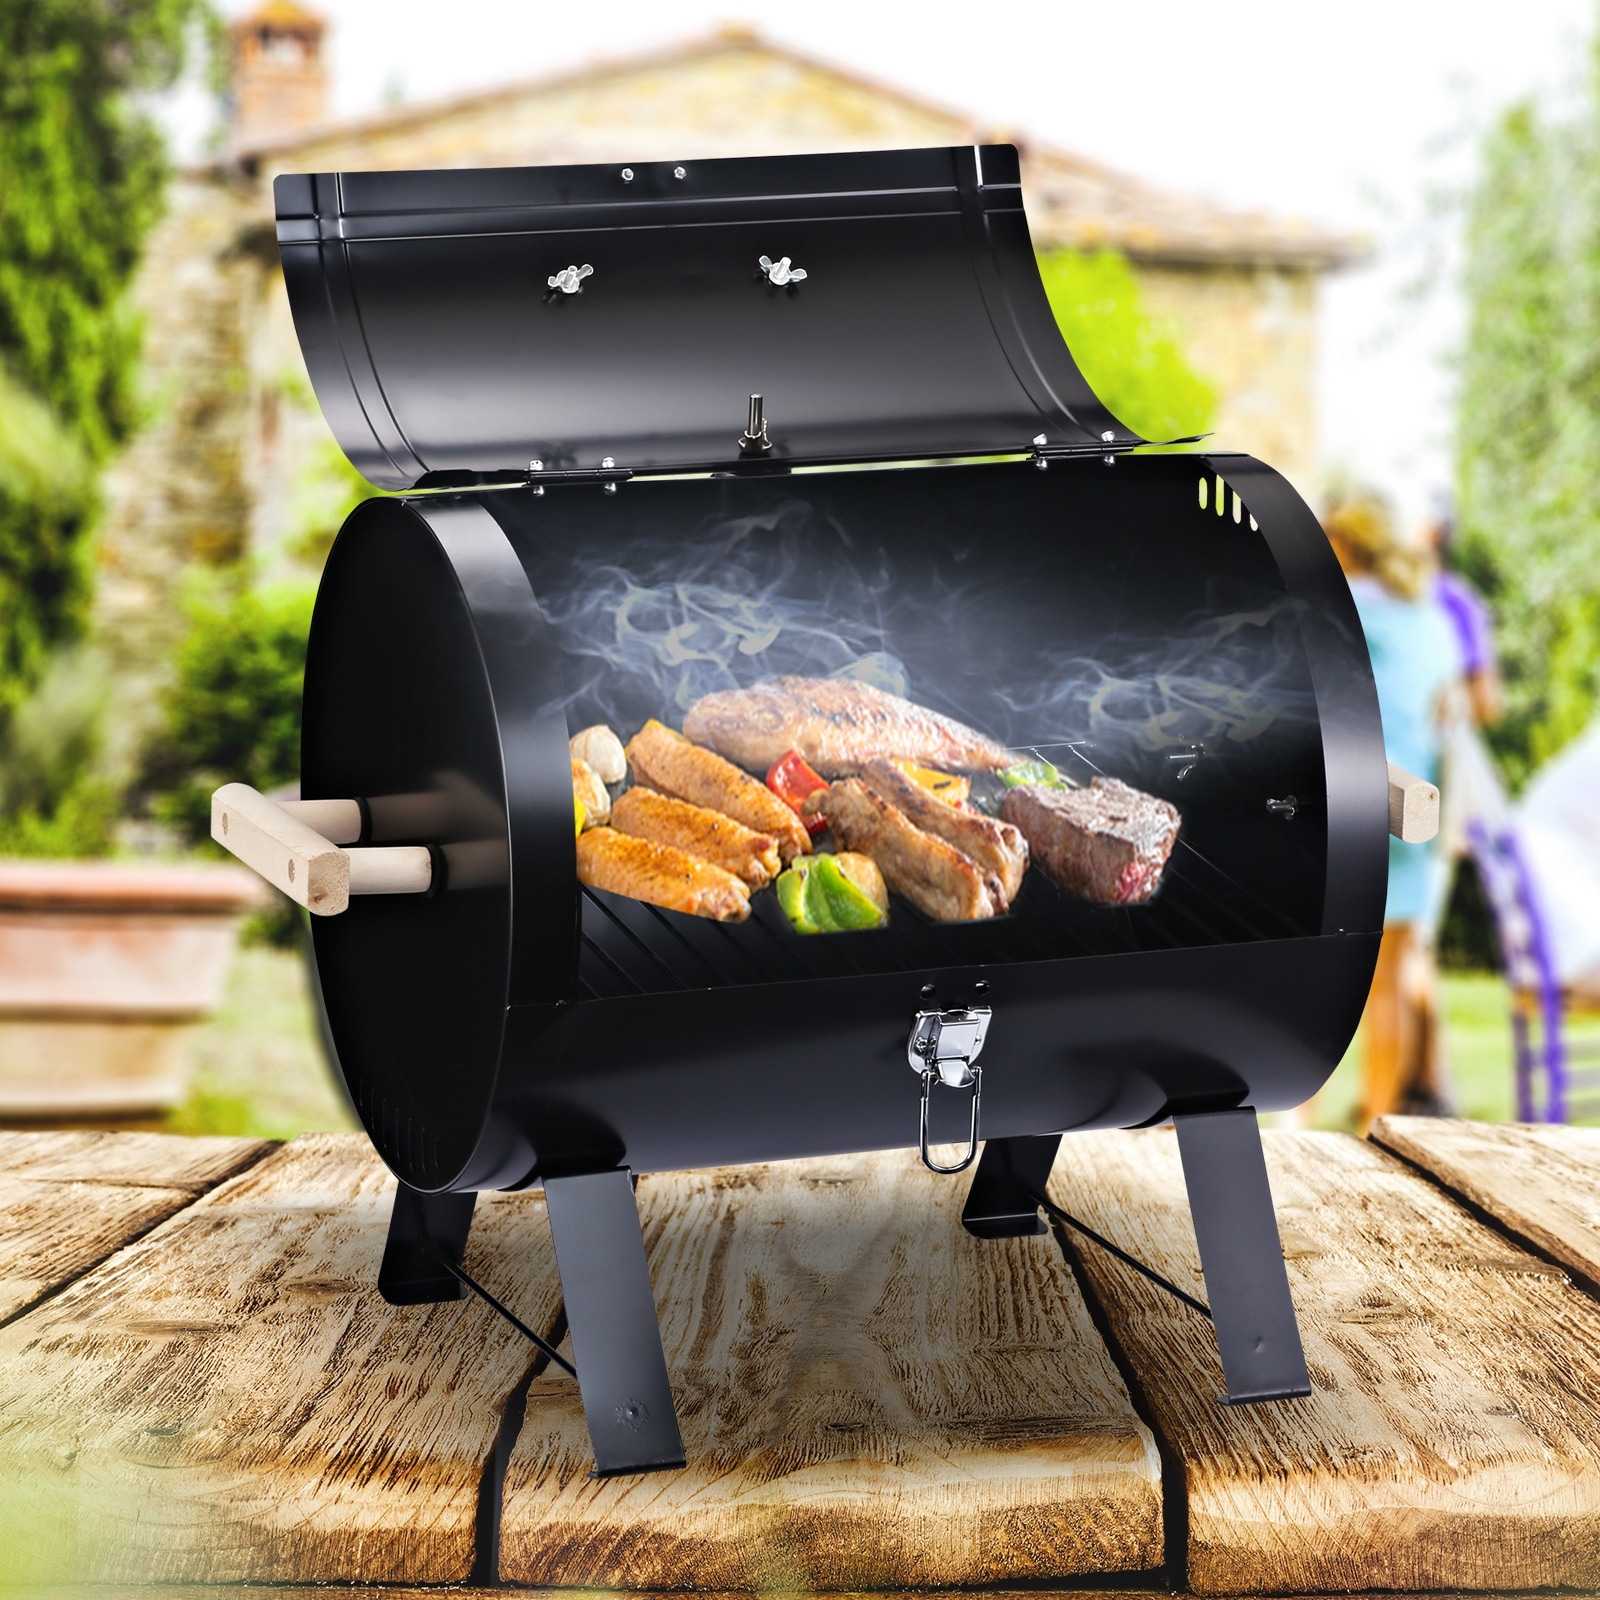 Portable BBQ Grill Charcoal Cooking Picnic Camping Outdoor Party Beach 